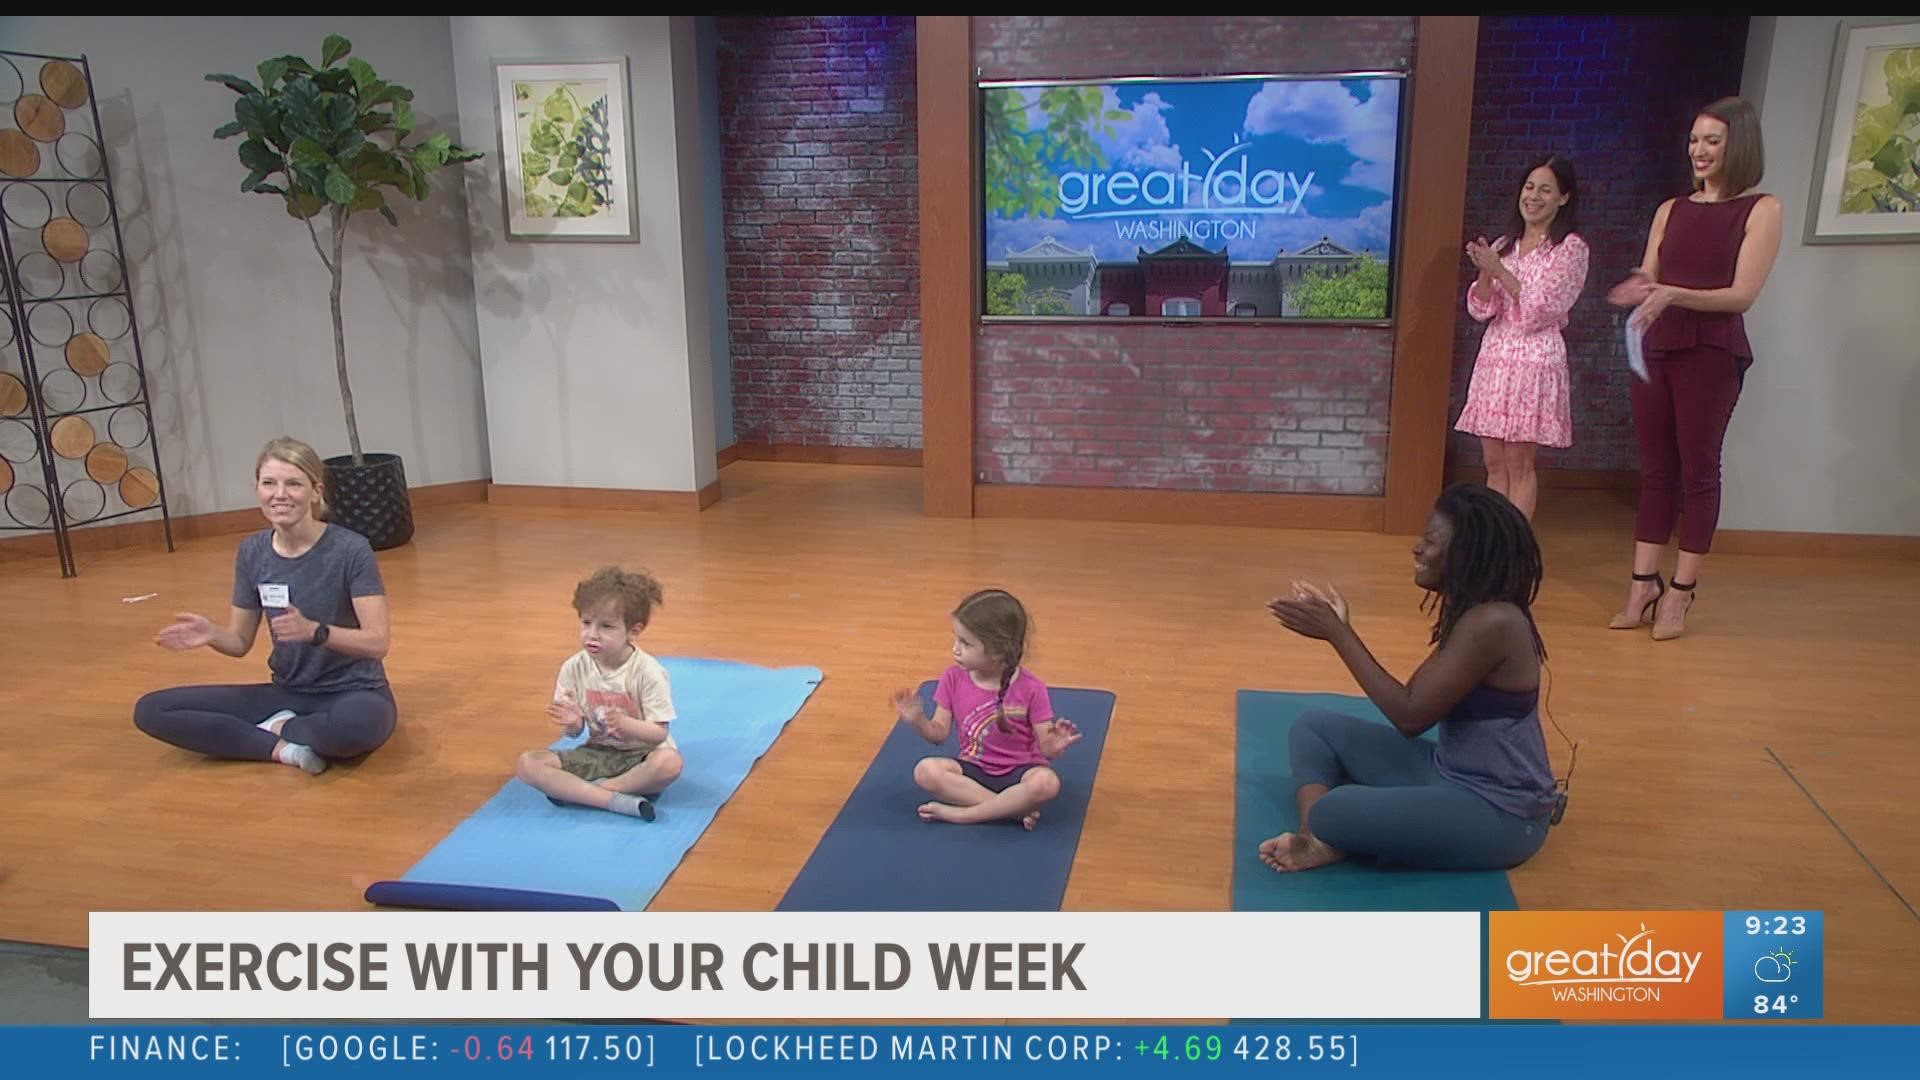 It's National Exercise With Your Child Week! The DC Jewish Community Center is offering exercise classes for all to come out and enjoy!